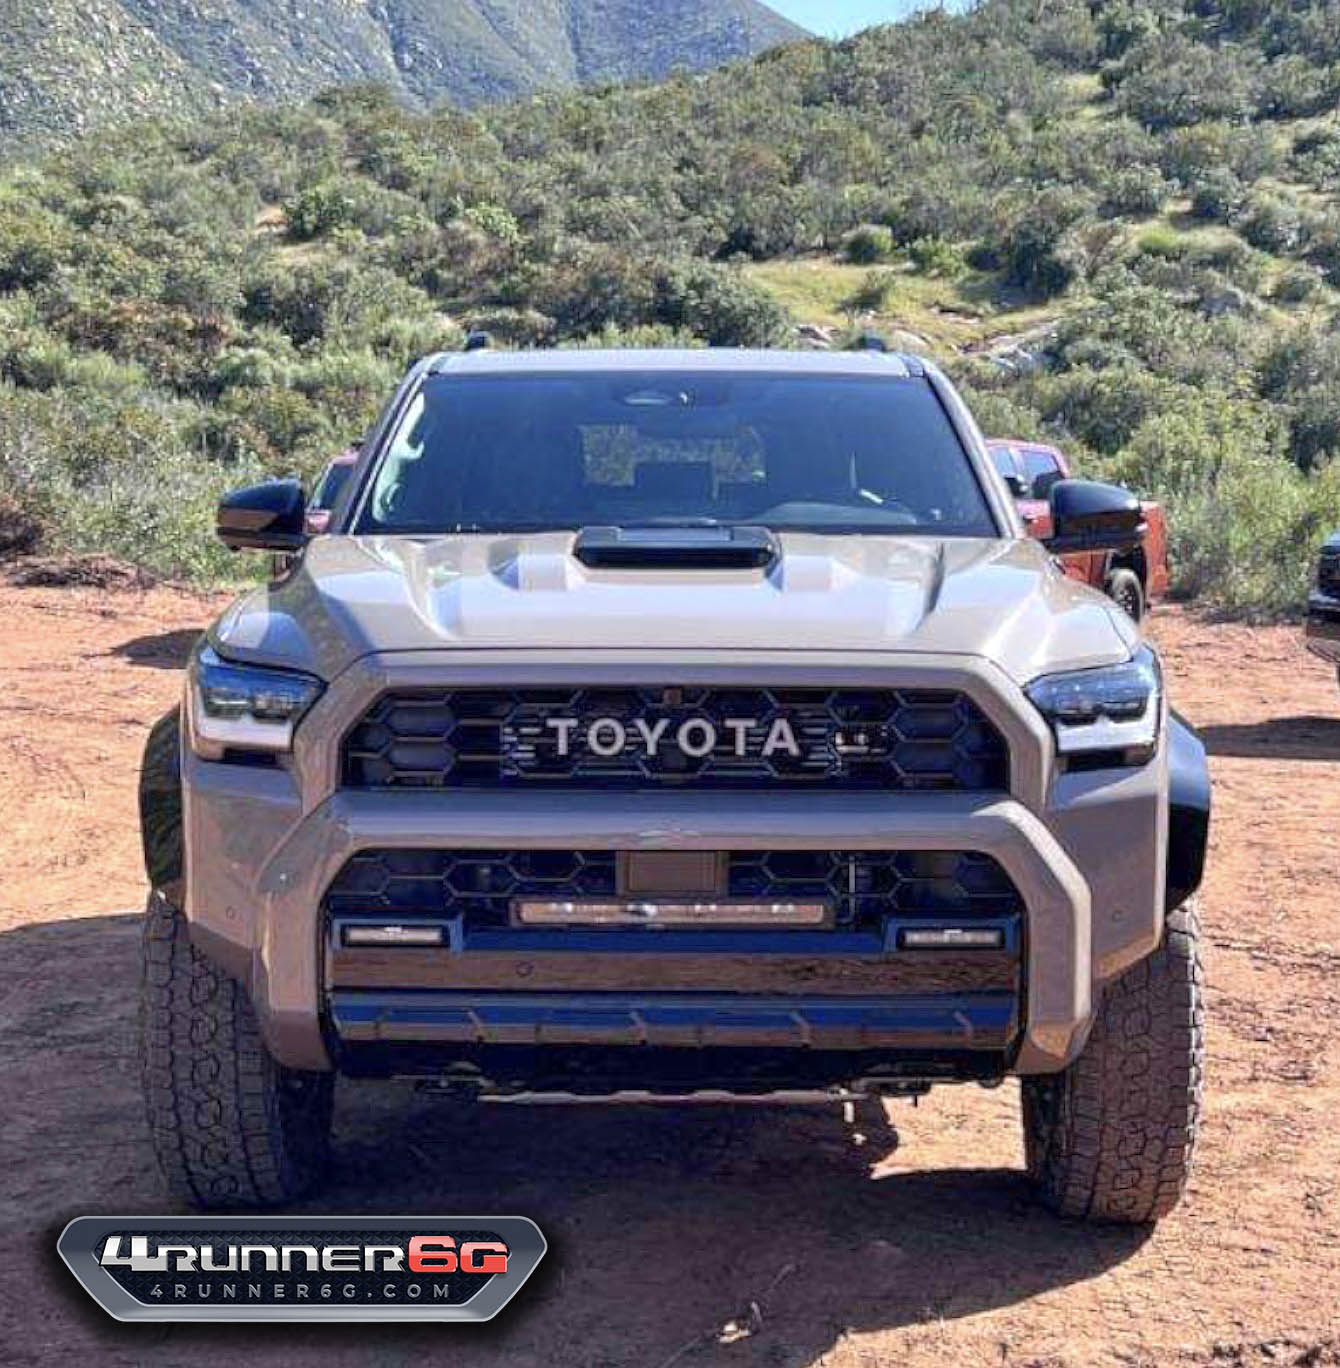 2025 Toyota 4runner 2025 4Runner Photos & Specs! 🔥 Trailhunter, TRD Pro, Off-Road, Limited Trims Real life 2025 4Runner photos 1